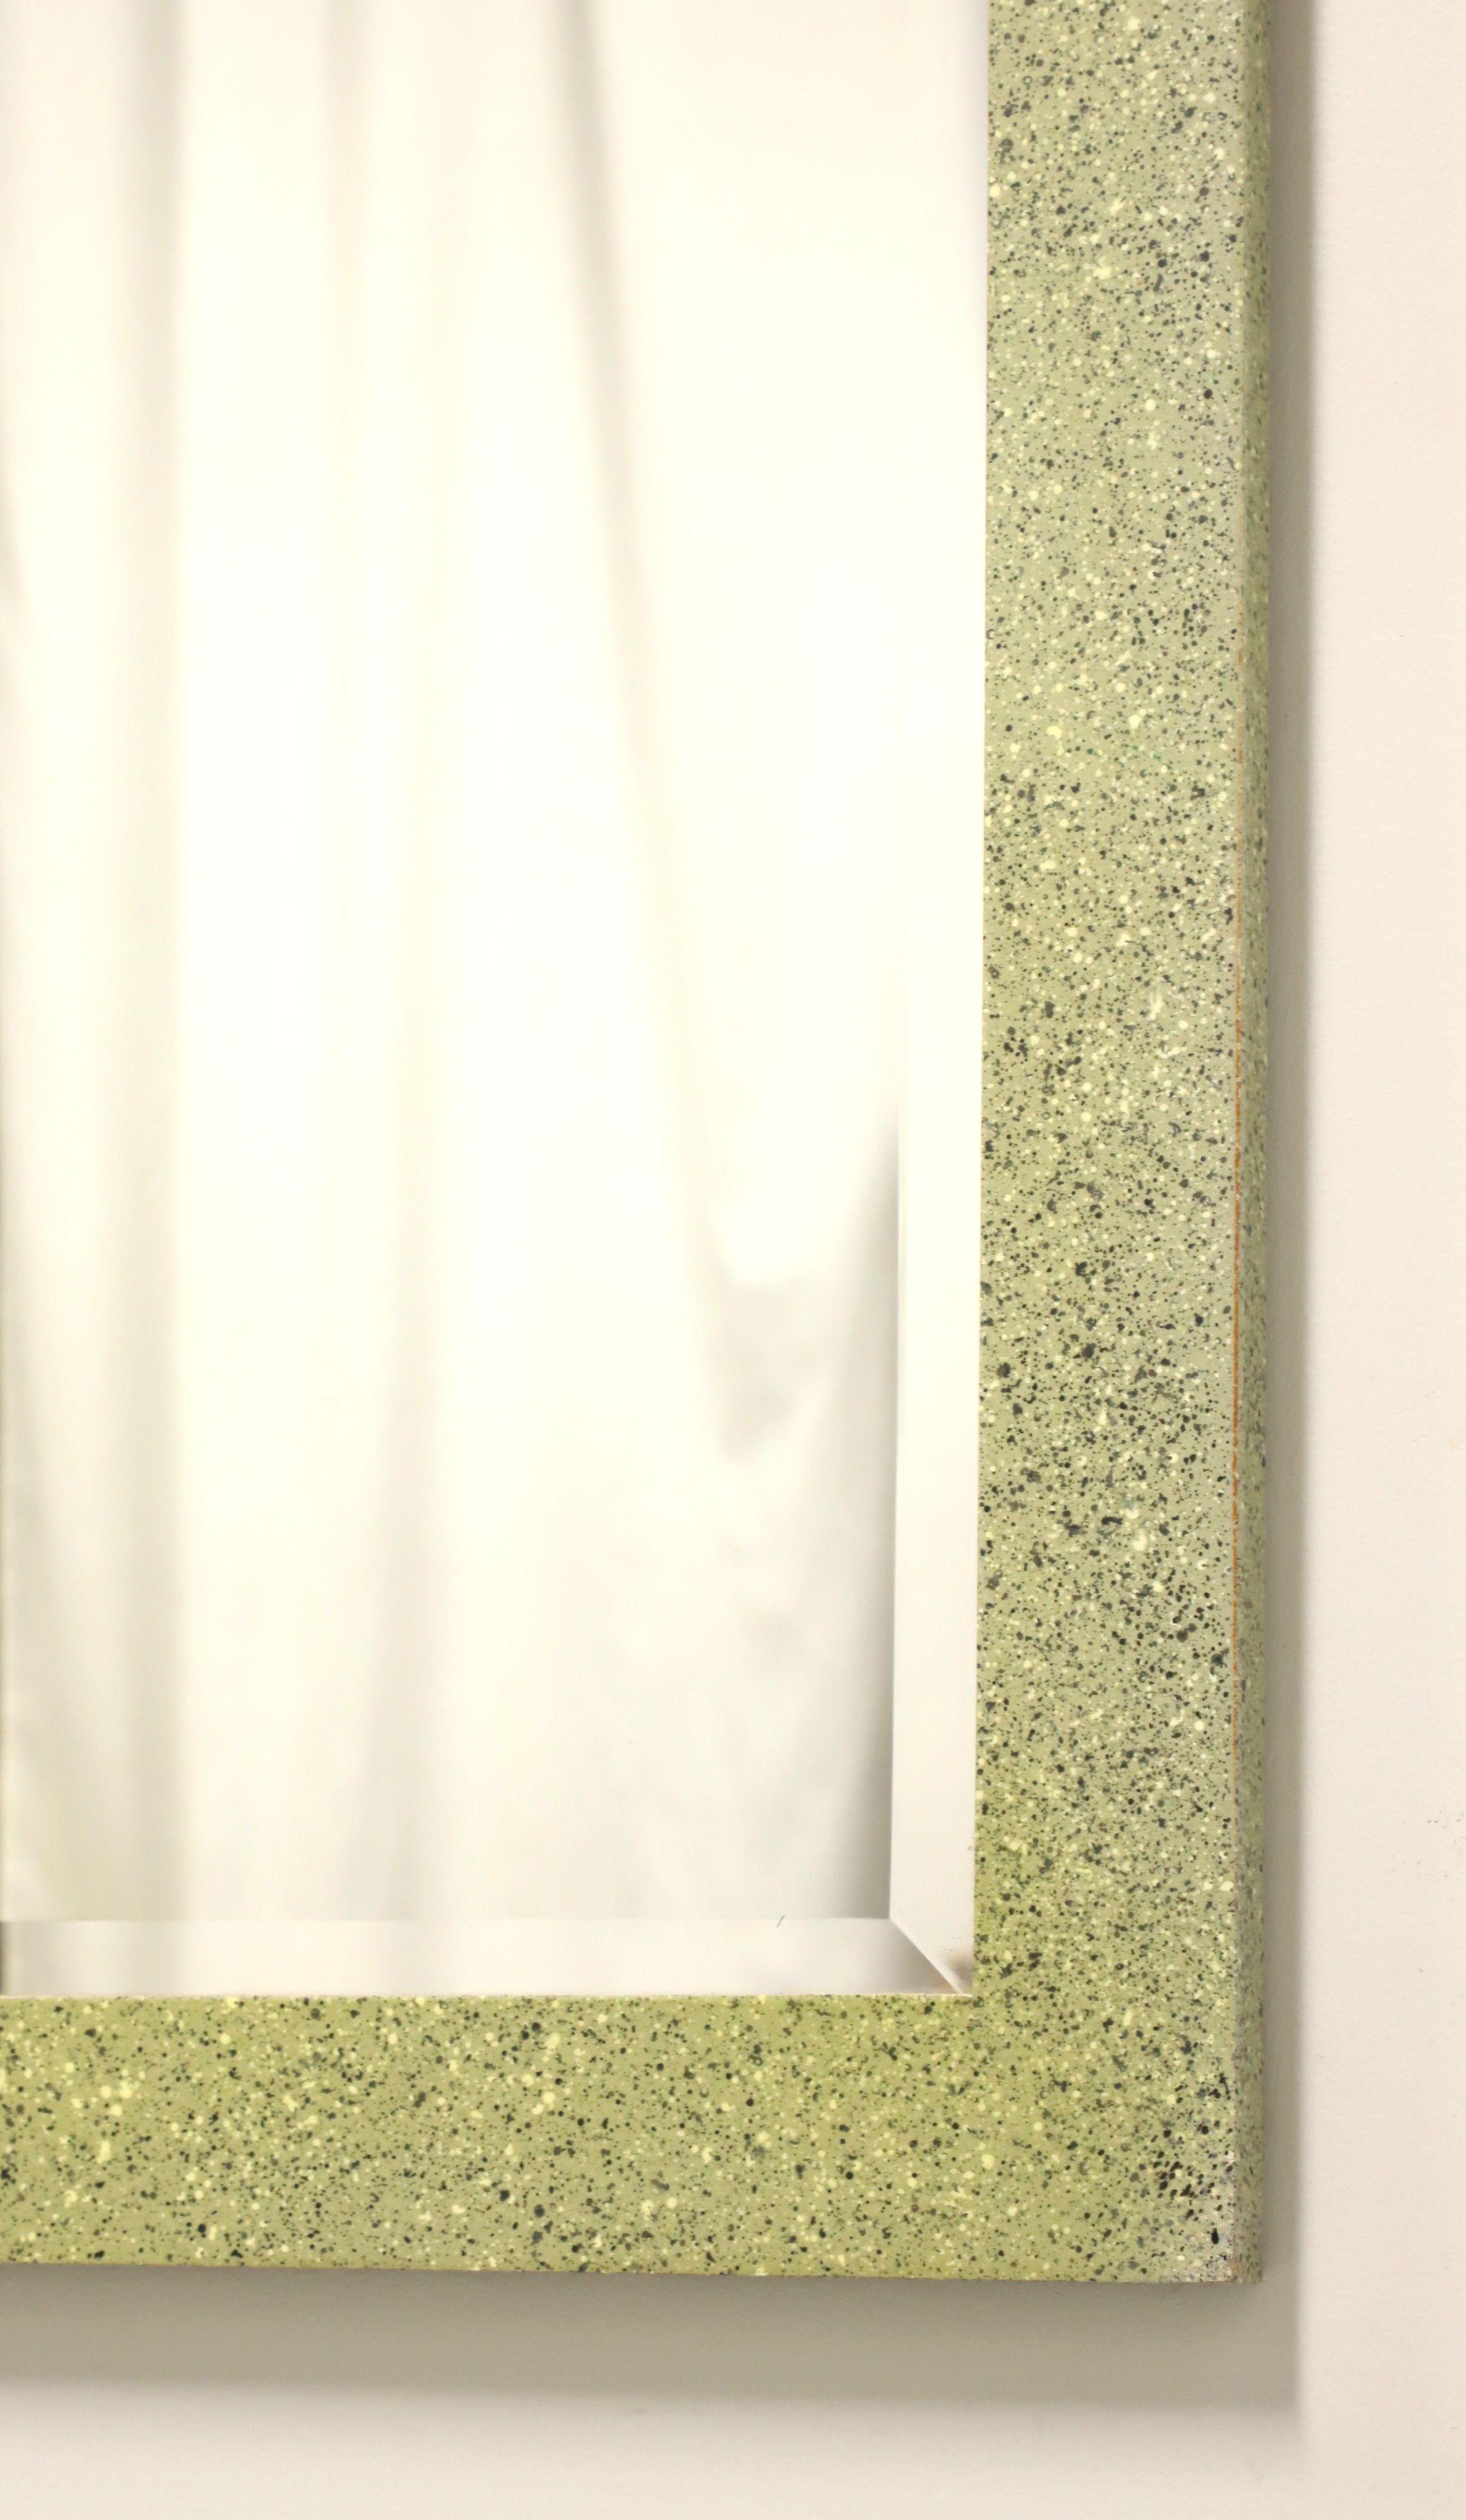 Mid 20th Century Italian Art Deco Green Speckled Beveled Wall Mirror For Sale 2